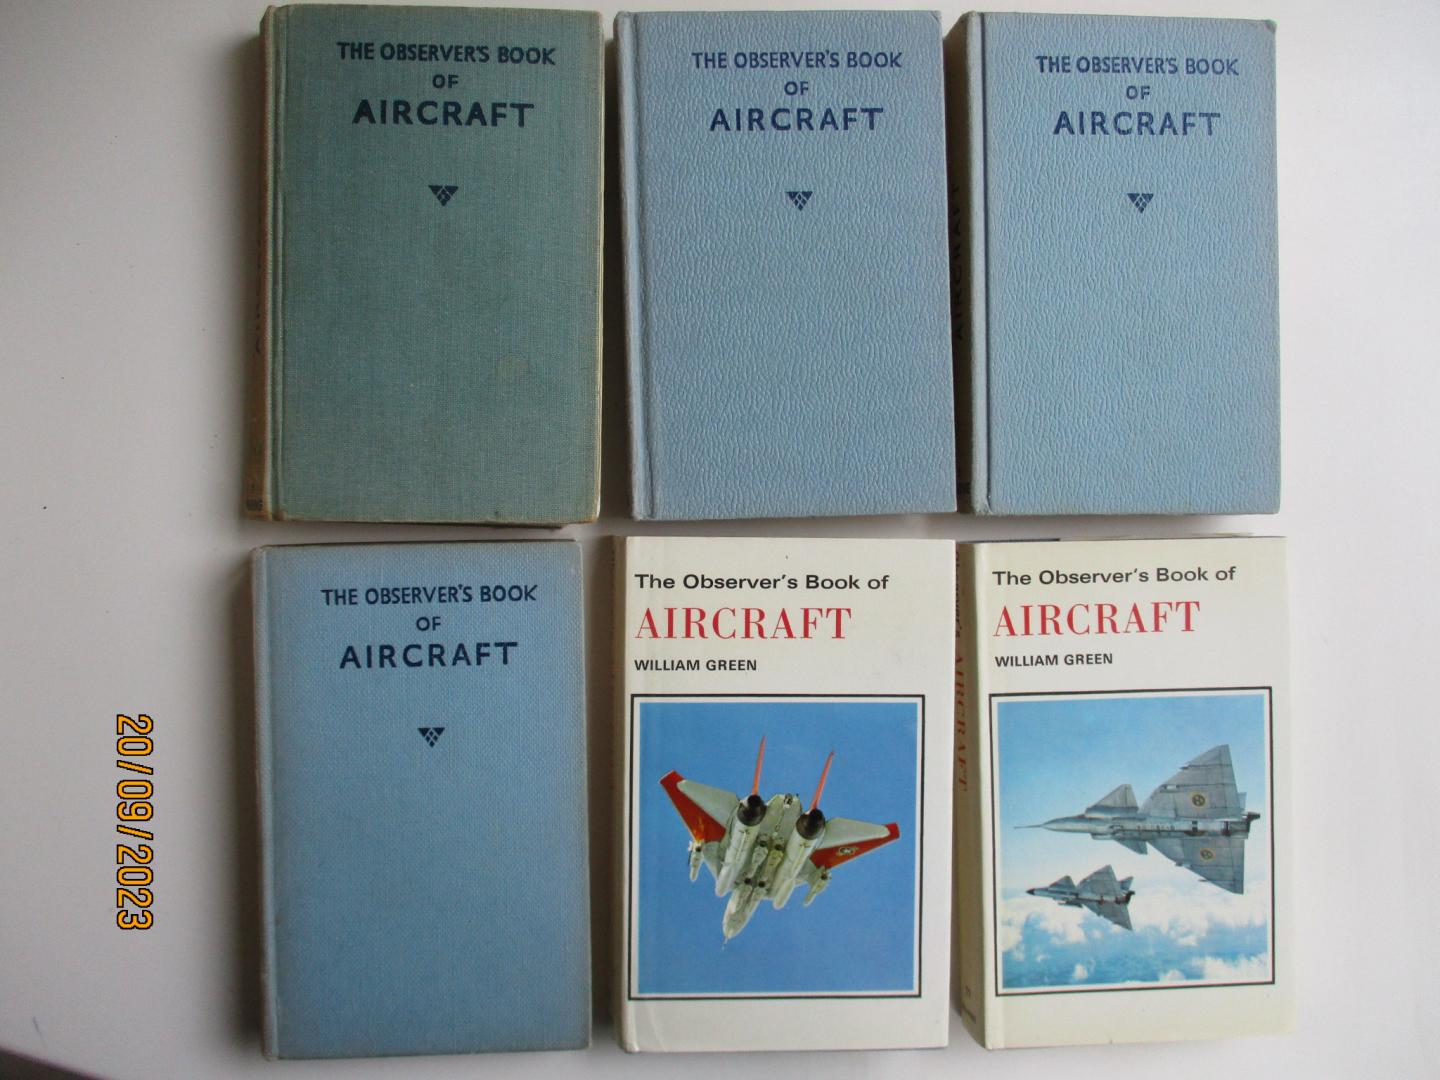 William Green e.a. - Serie "The Observer's book of aircraft " meerdere jaarboeken / editions !